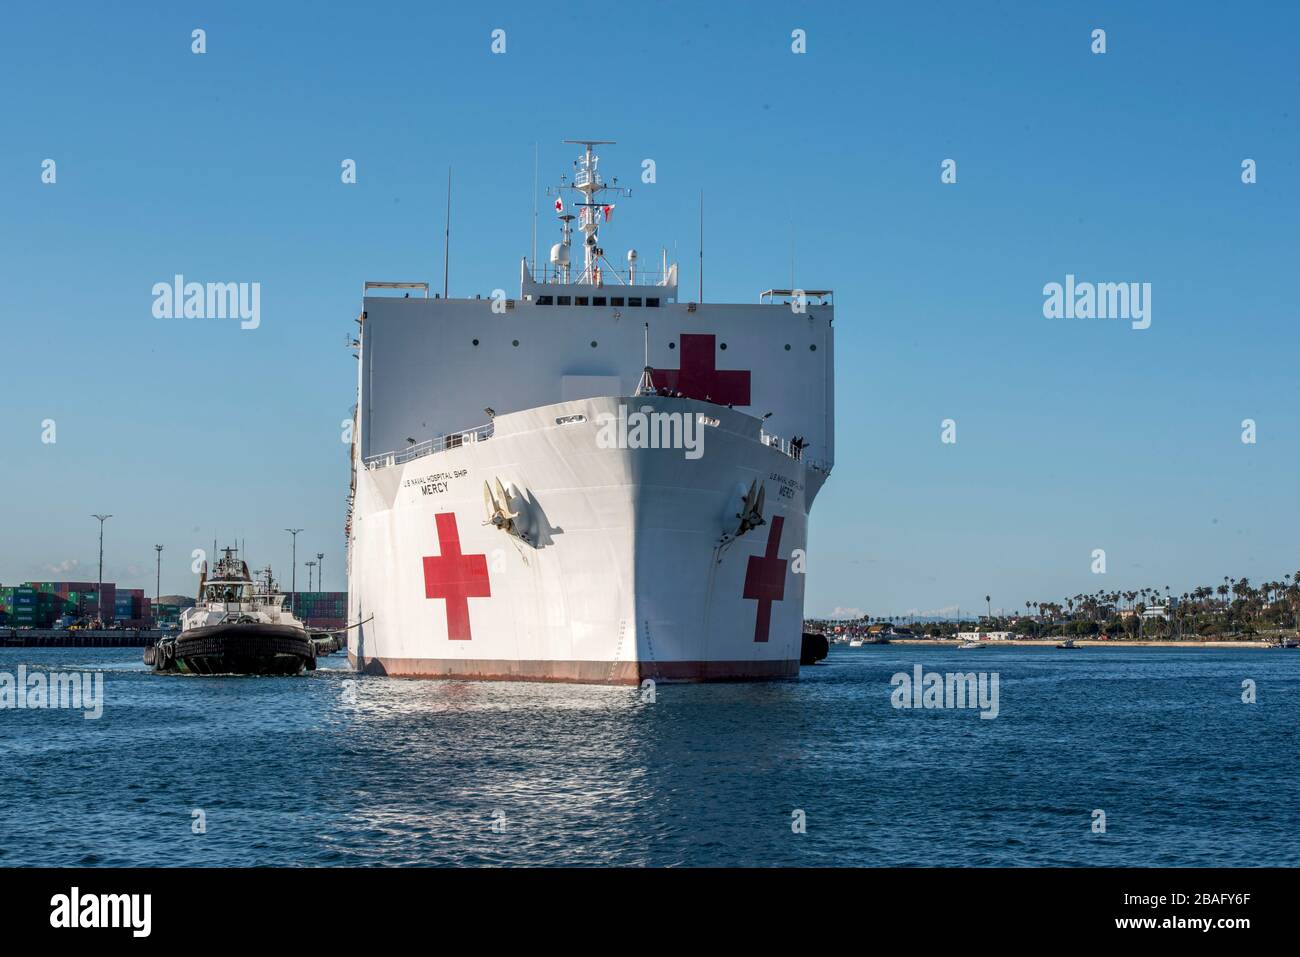 In this photo released by the United States Navy, the Military Sealift Command hospital ship USNS Mercy (T-AH 19) arrives in Los Angeles, California, March 27, 2020. Mercy deployed in support of the nation's COVID-19 response efforts, and will serve as a referral hospital for non-COVID-19 patients currently admitted to shore-based hospitals. This allows shore base hospitals to focus their efforts on COVID-19 cases. One of the Department of Defense's missions is Defense Support of Civil Authorities. DoD is supporting the Federal Emergency Management Agency, the lead federal agency, as well as s Stock Photo